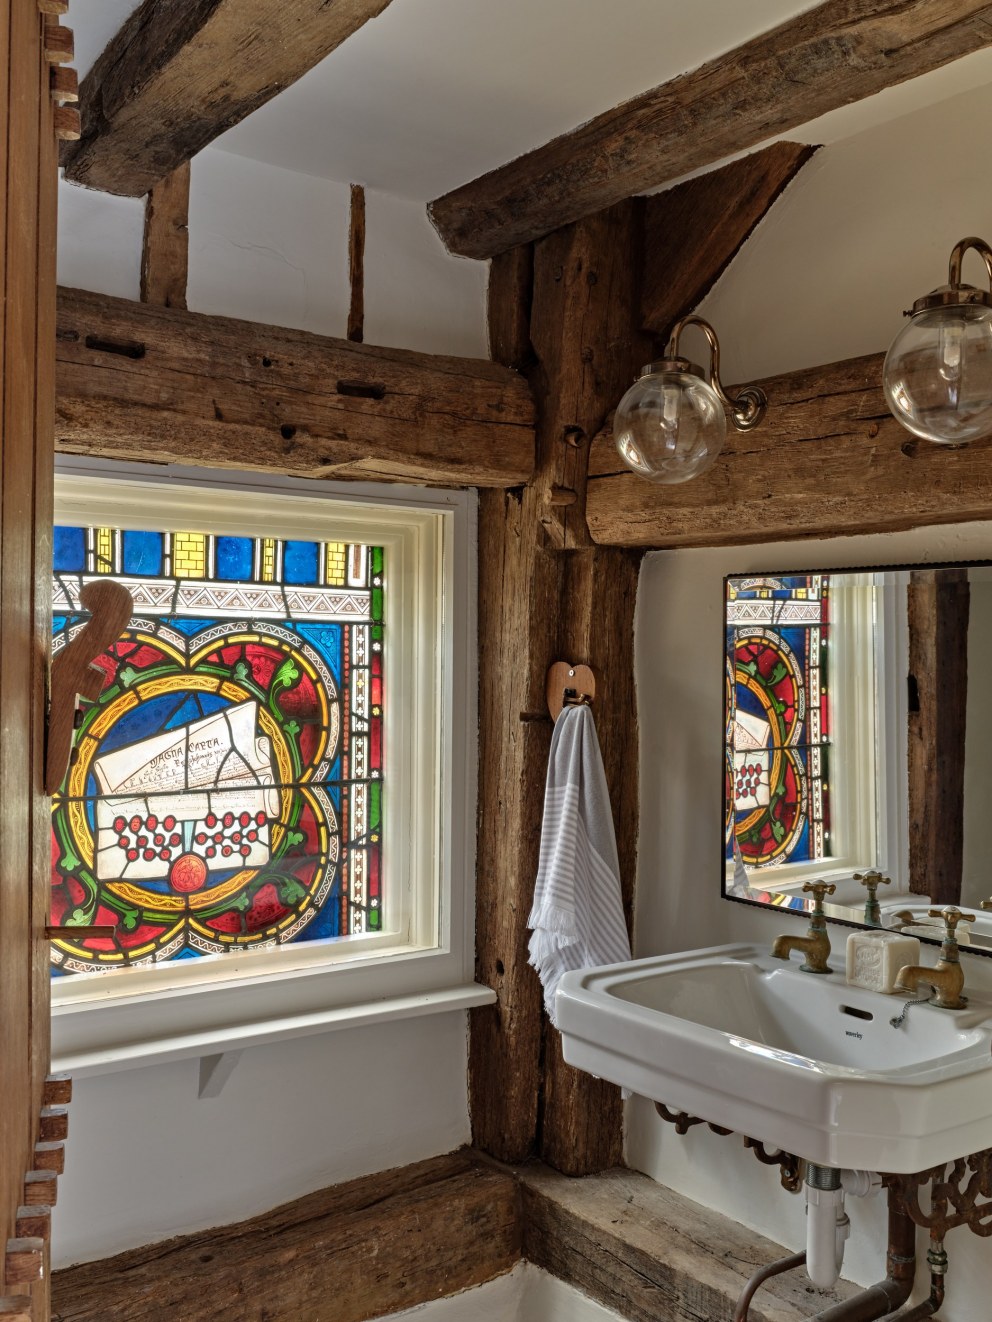 The New Forest Barn  | Cloakroom Loo | Interior Designers